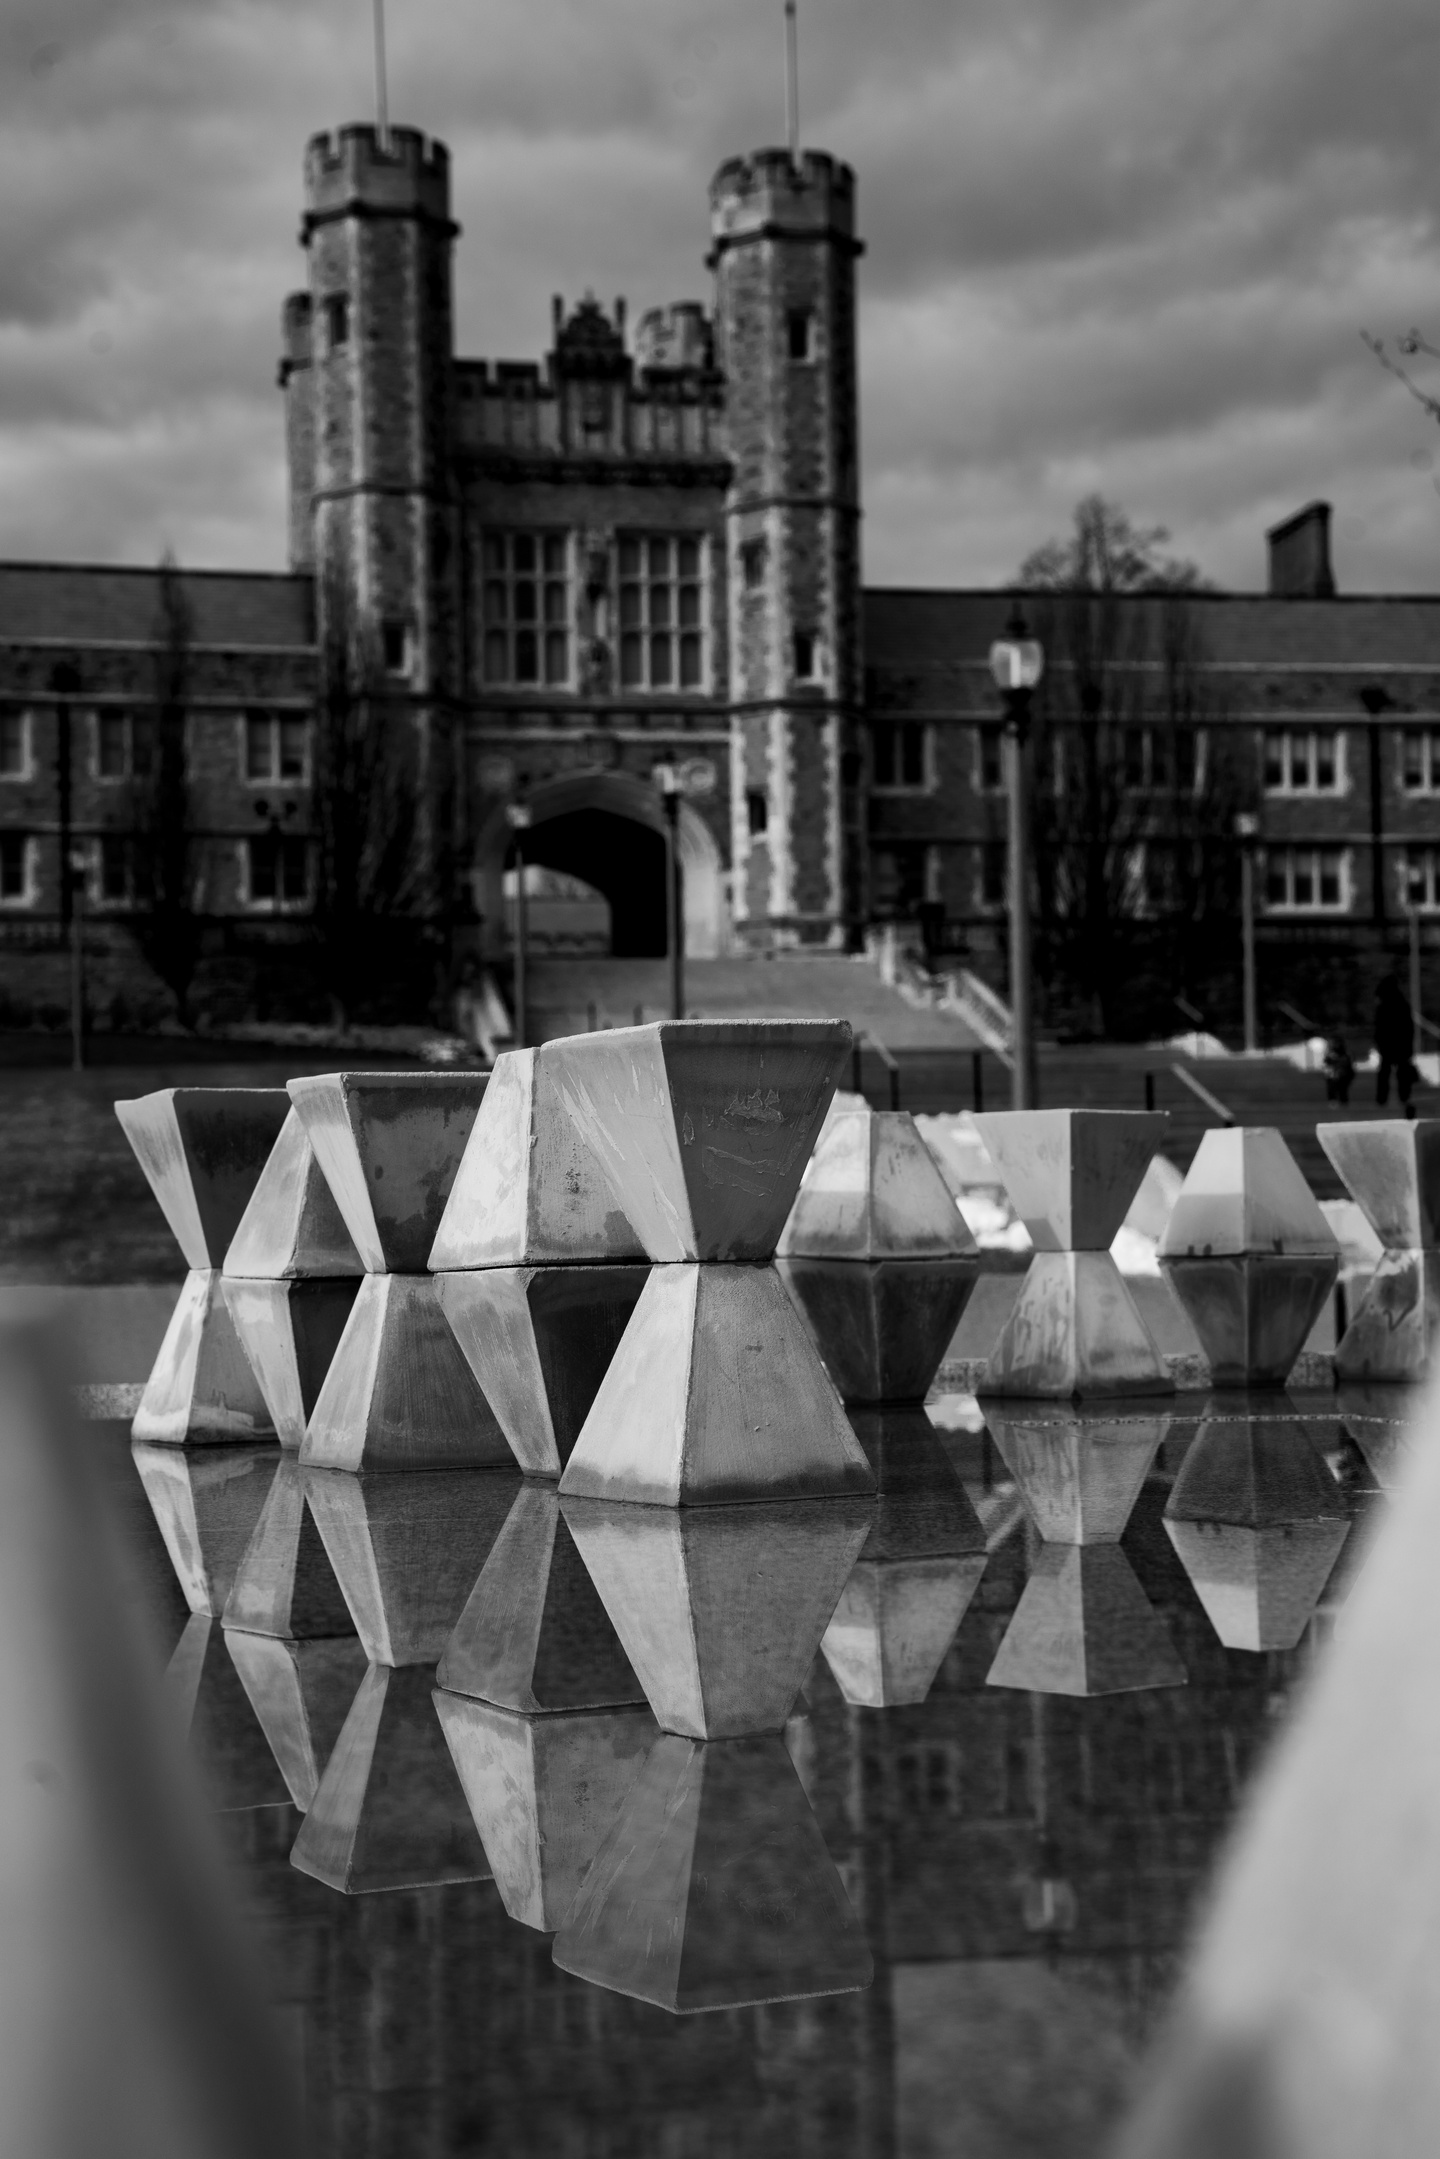 Assembly of modular concrete pyramids with flat tops stacked 2 high on a reflective surface outside. Behind them can be seen Brookings Hall on Washington University's campus.